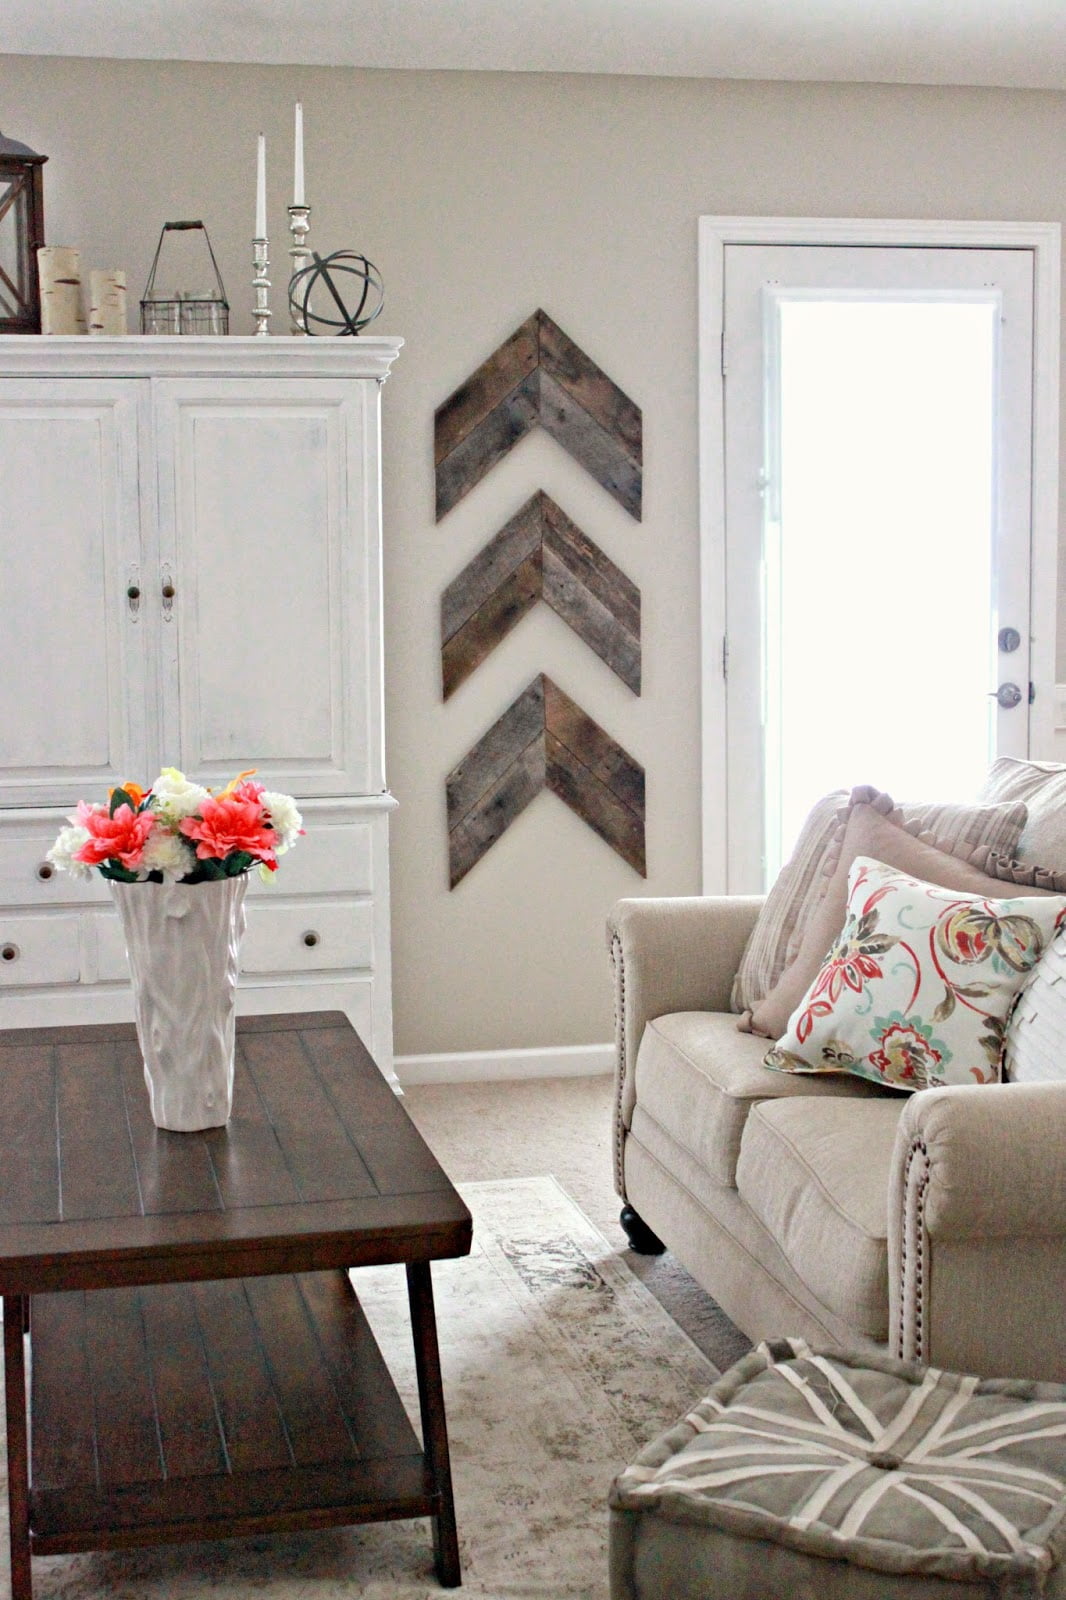 Chic and Simple Reclaimed Wood Wall Chevrons